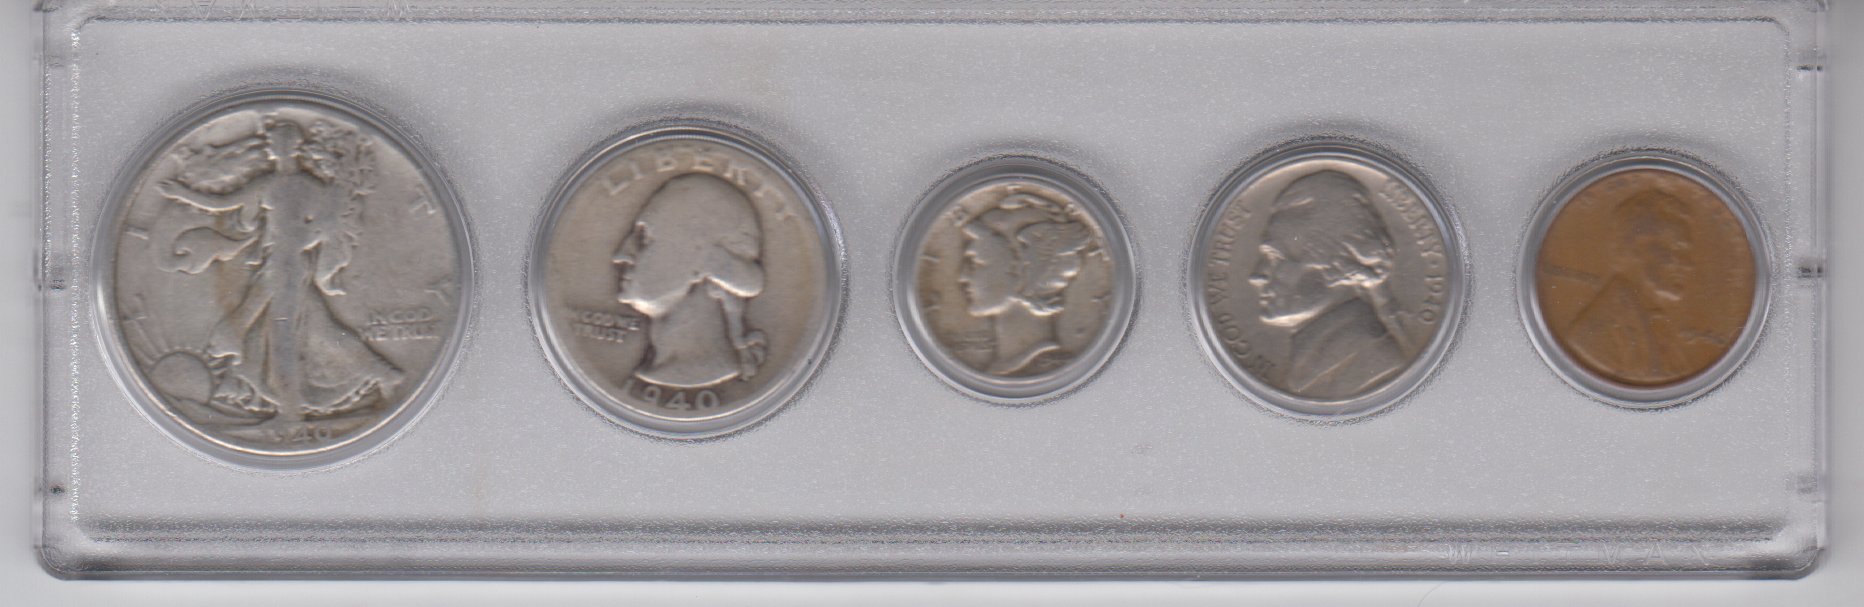 1940 Birth Year Coin Set (5) Coins - Silver Half dollar, Silver Quarter, Silver Dime, Nickel, and Cent All Dated 1940 and Encased in Plastic Display Case Very Good Circulated Condition